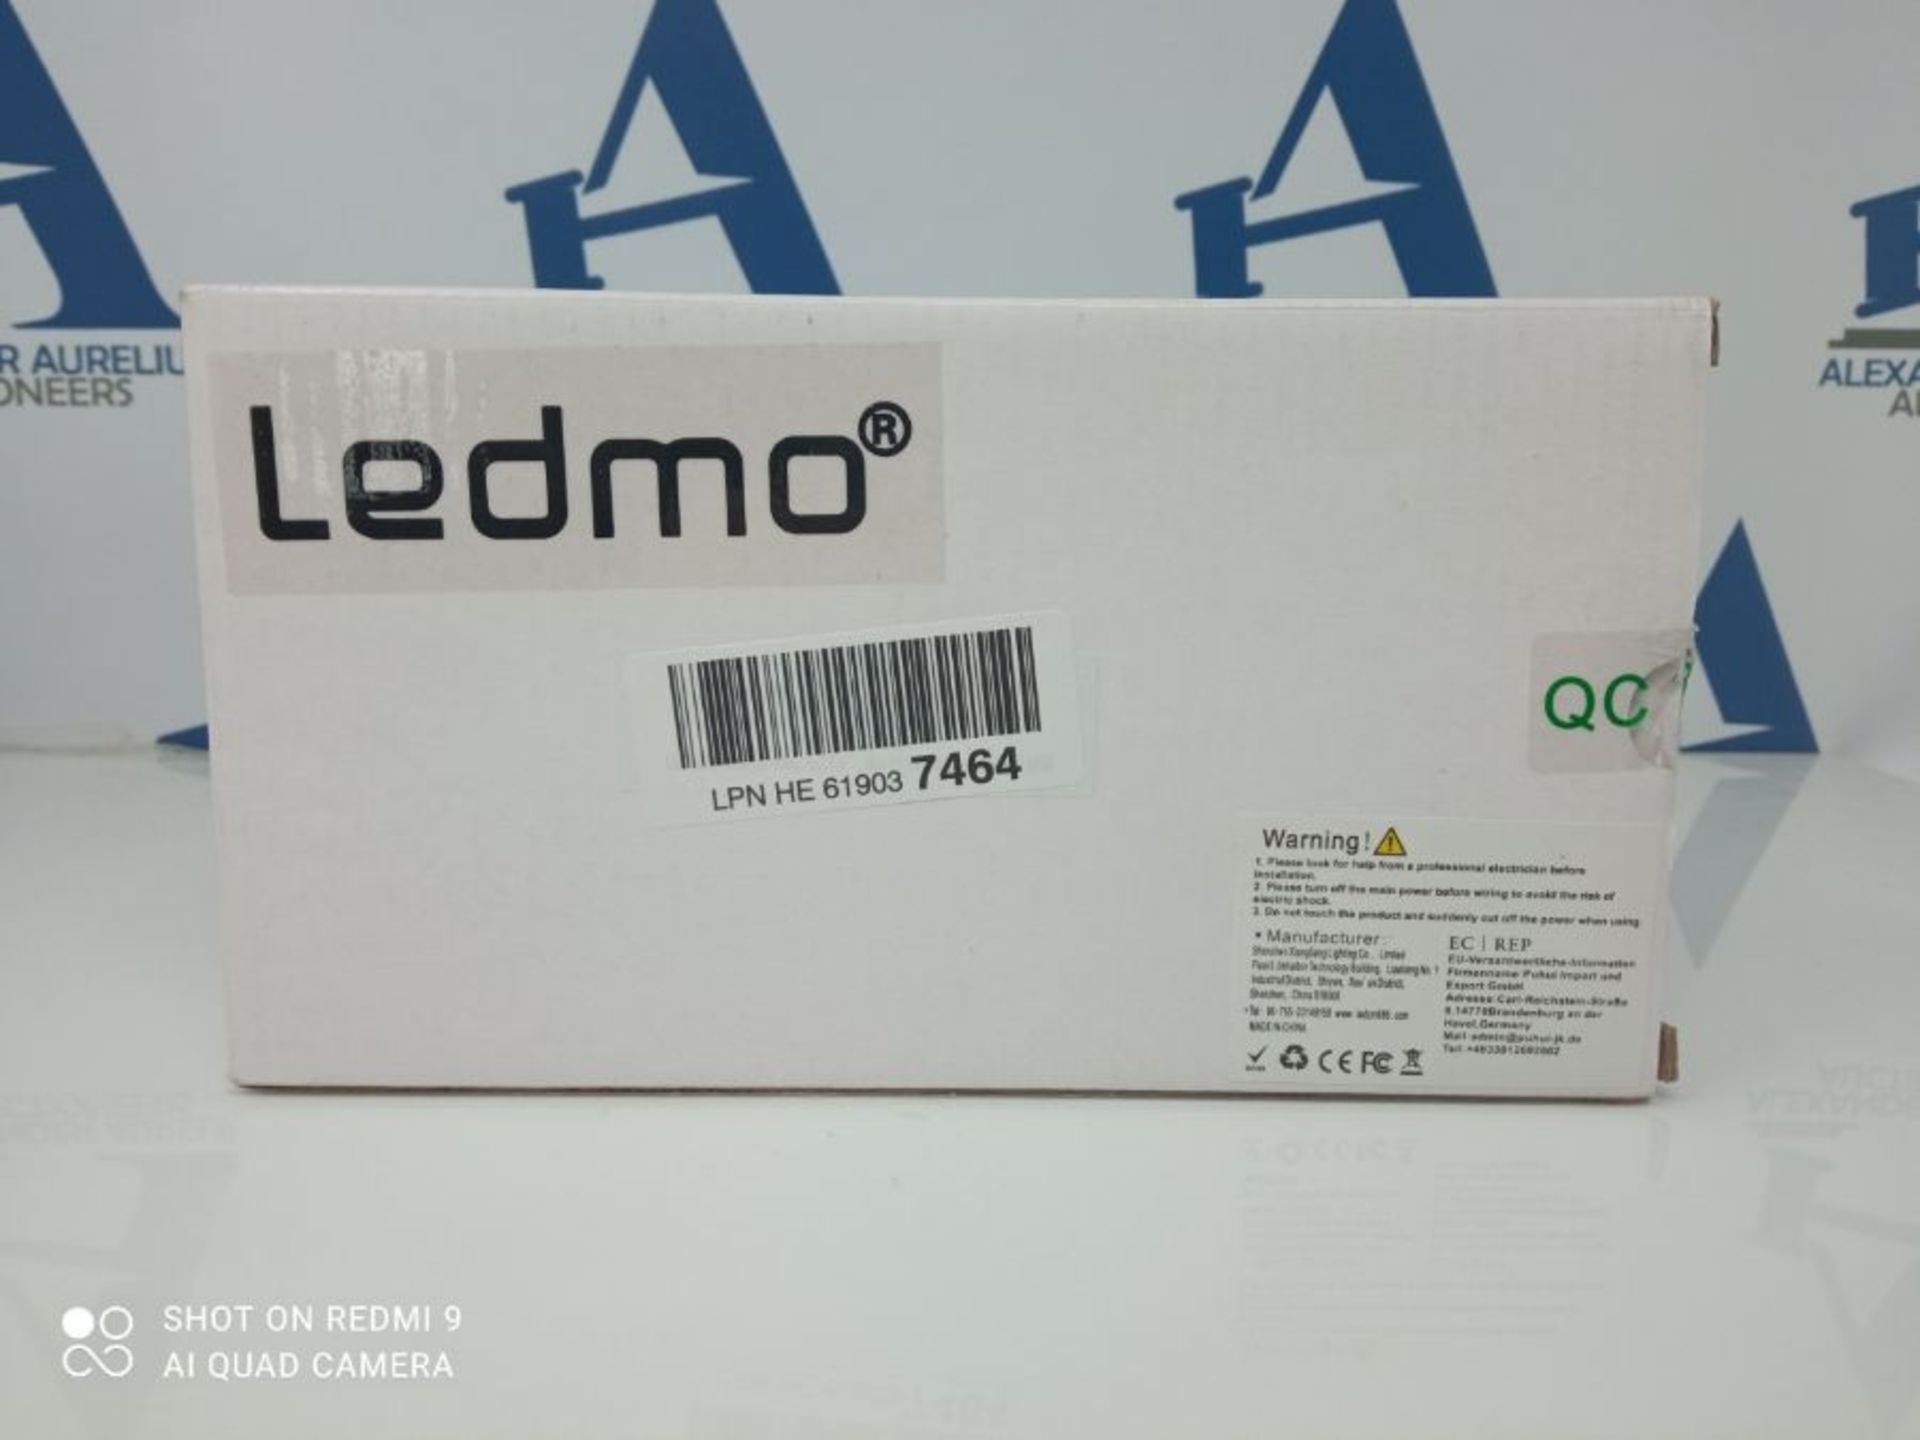 LEDMO 12V 20A 240W Switching Power Supply Driver Converter Adapter for LED Strip - Image 2 of 3